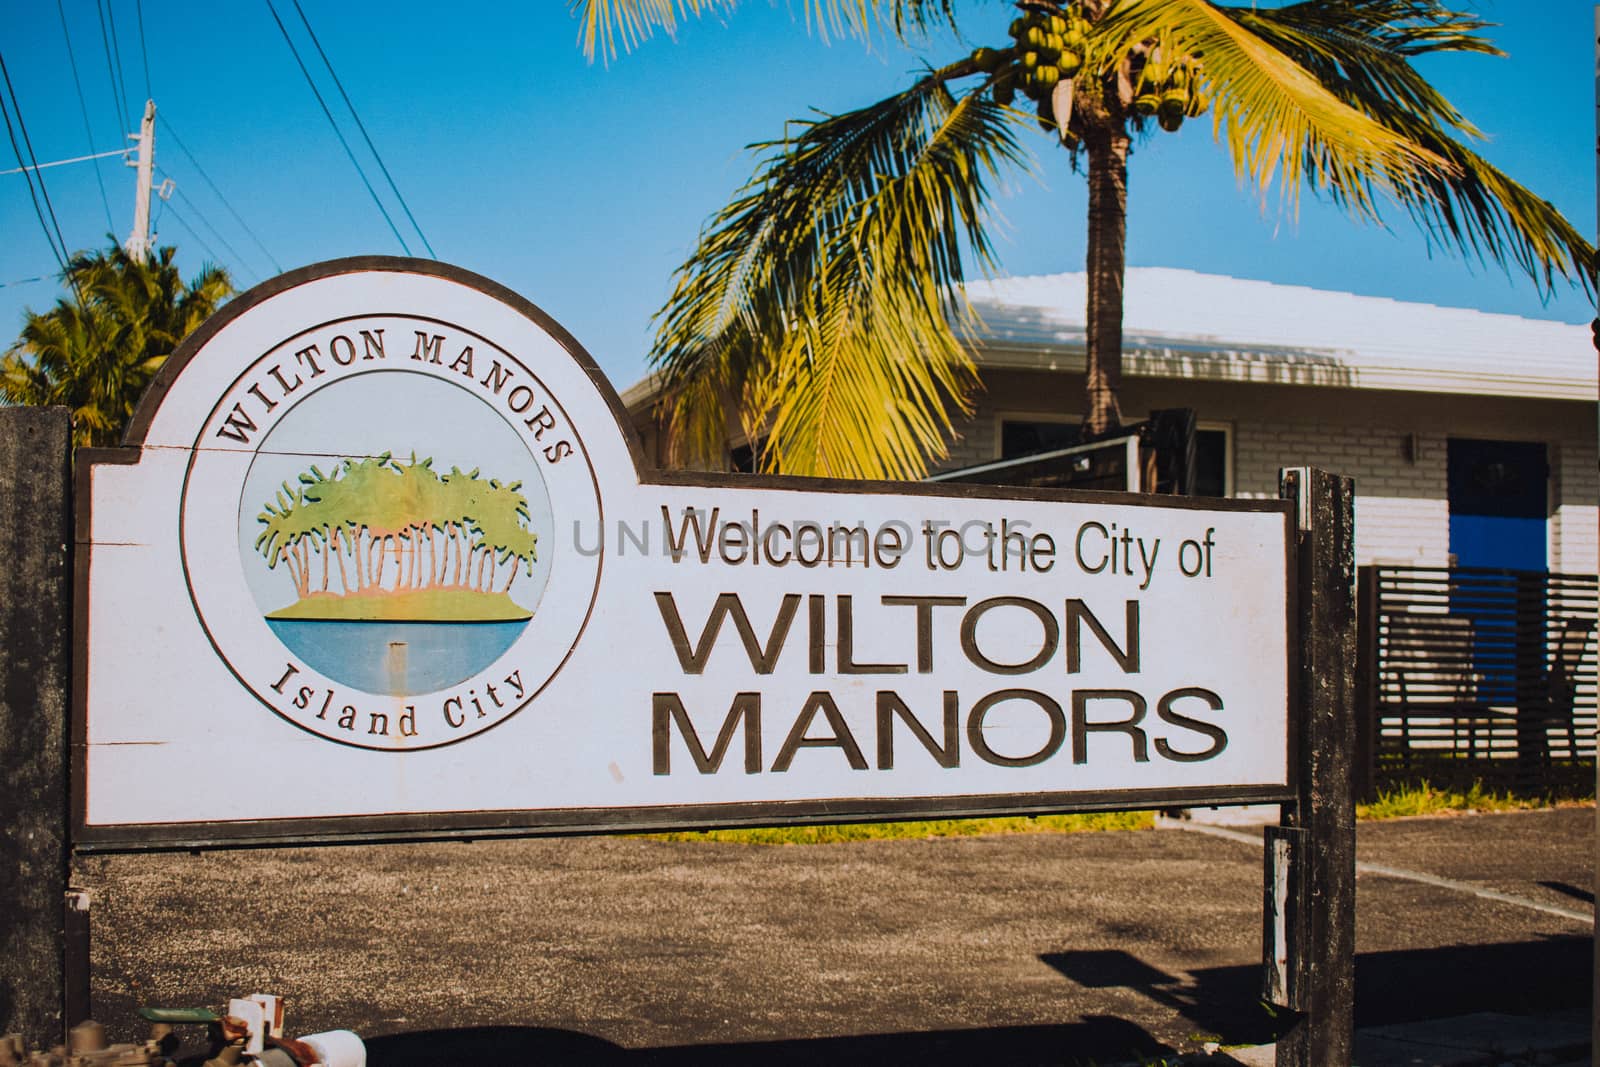 WILTON MANORS, FLORIDA - JAN 5, 2020: Sign That Says Welcome to the city of Wilton Manors With Palm Trees on an Island Graphic That Says Island City Underneath in this urban city with a population of 12,797 in 2018 